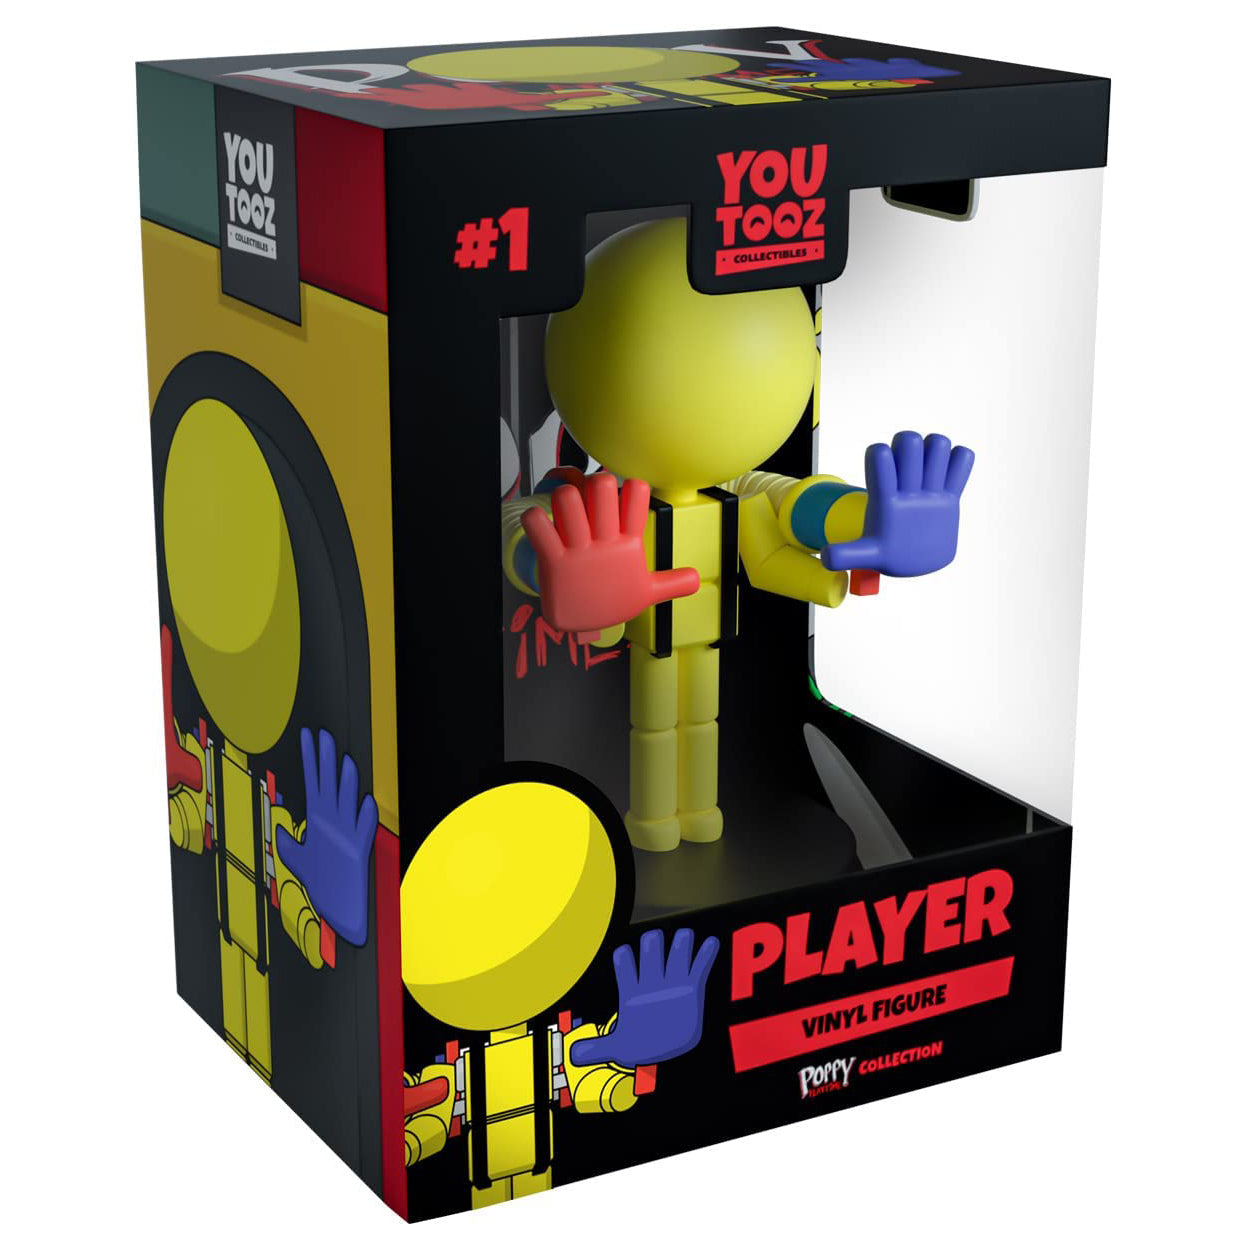 Collector Clip Poppy Playtime Mystery Pack [1 RANDOM Figure]